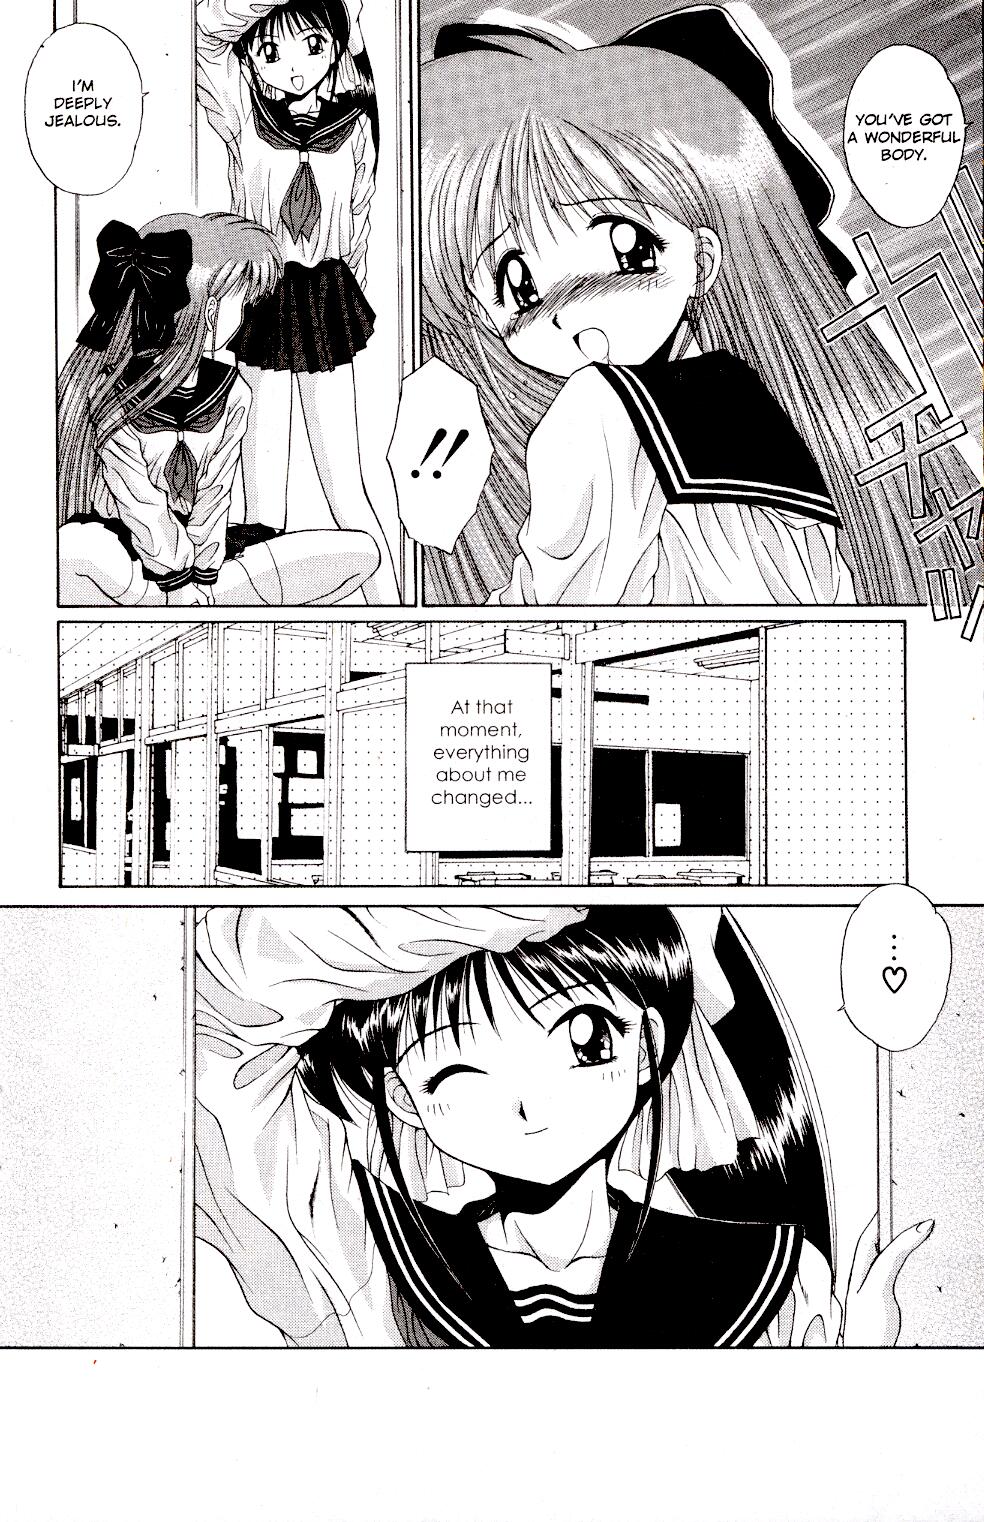 A-G Super Erotic Anthology Issue 9 [english] page 33 full